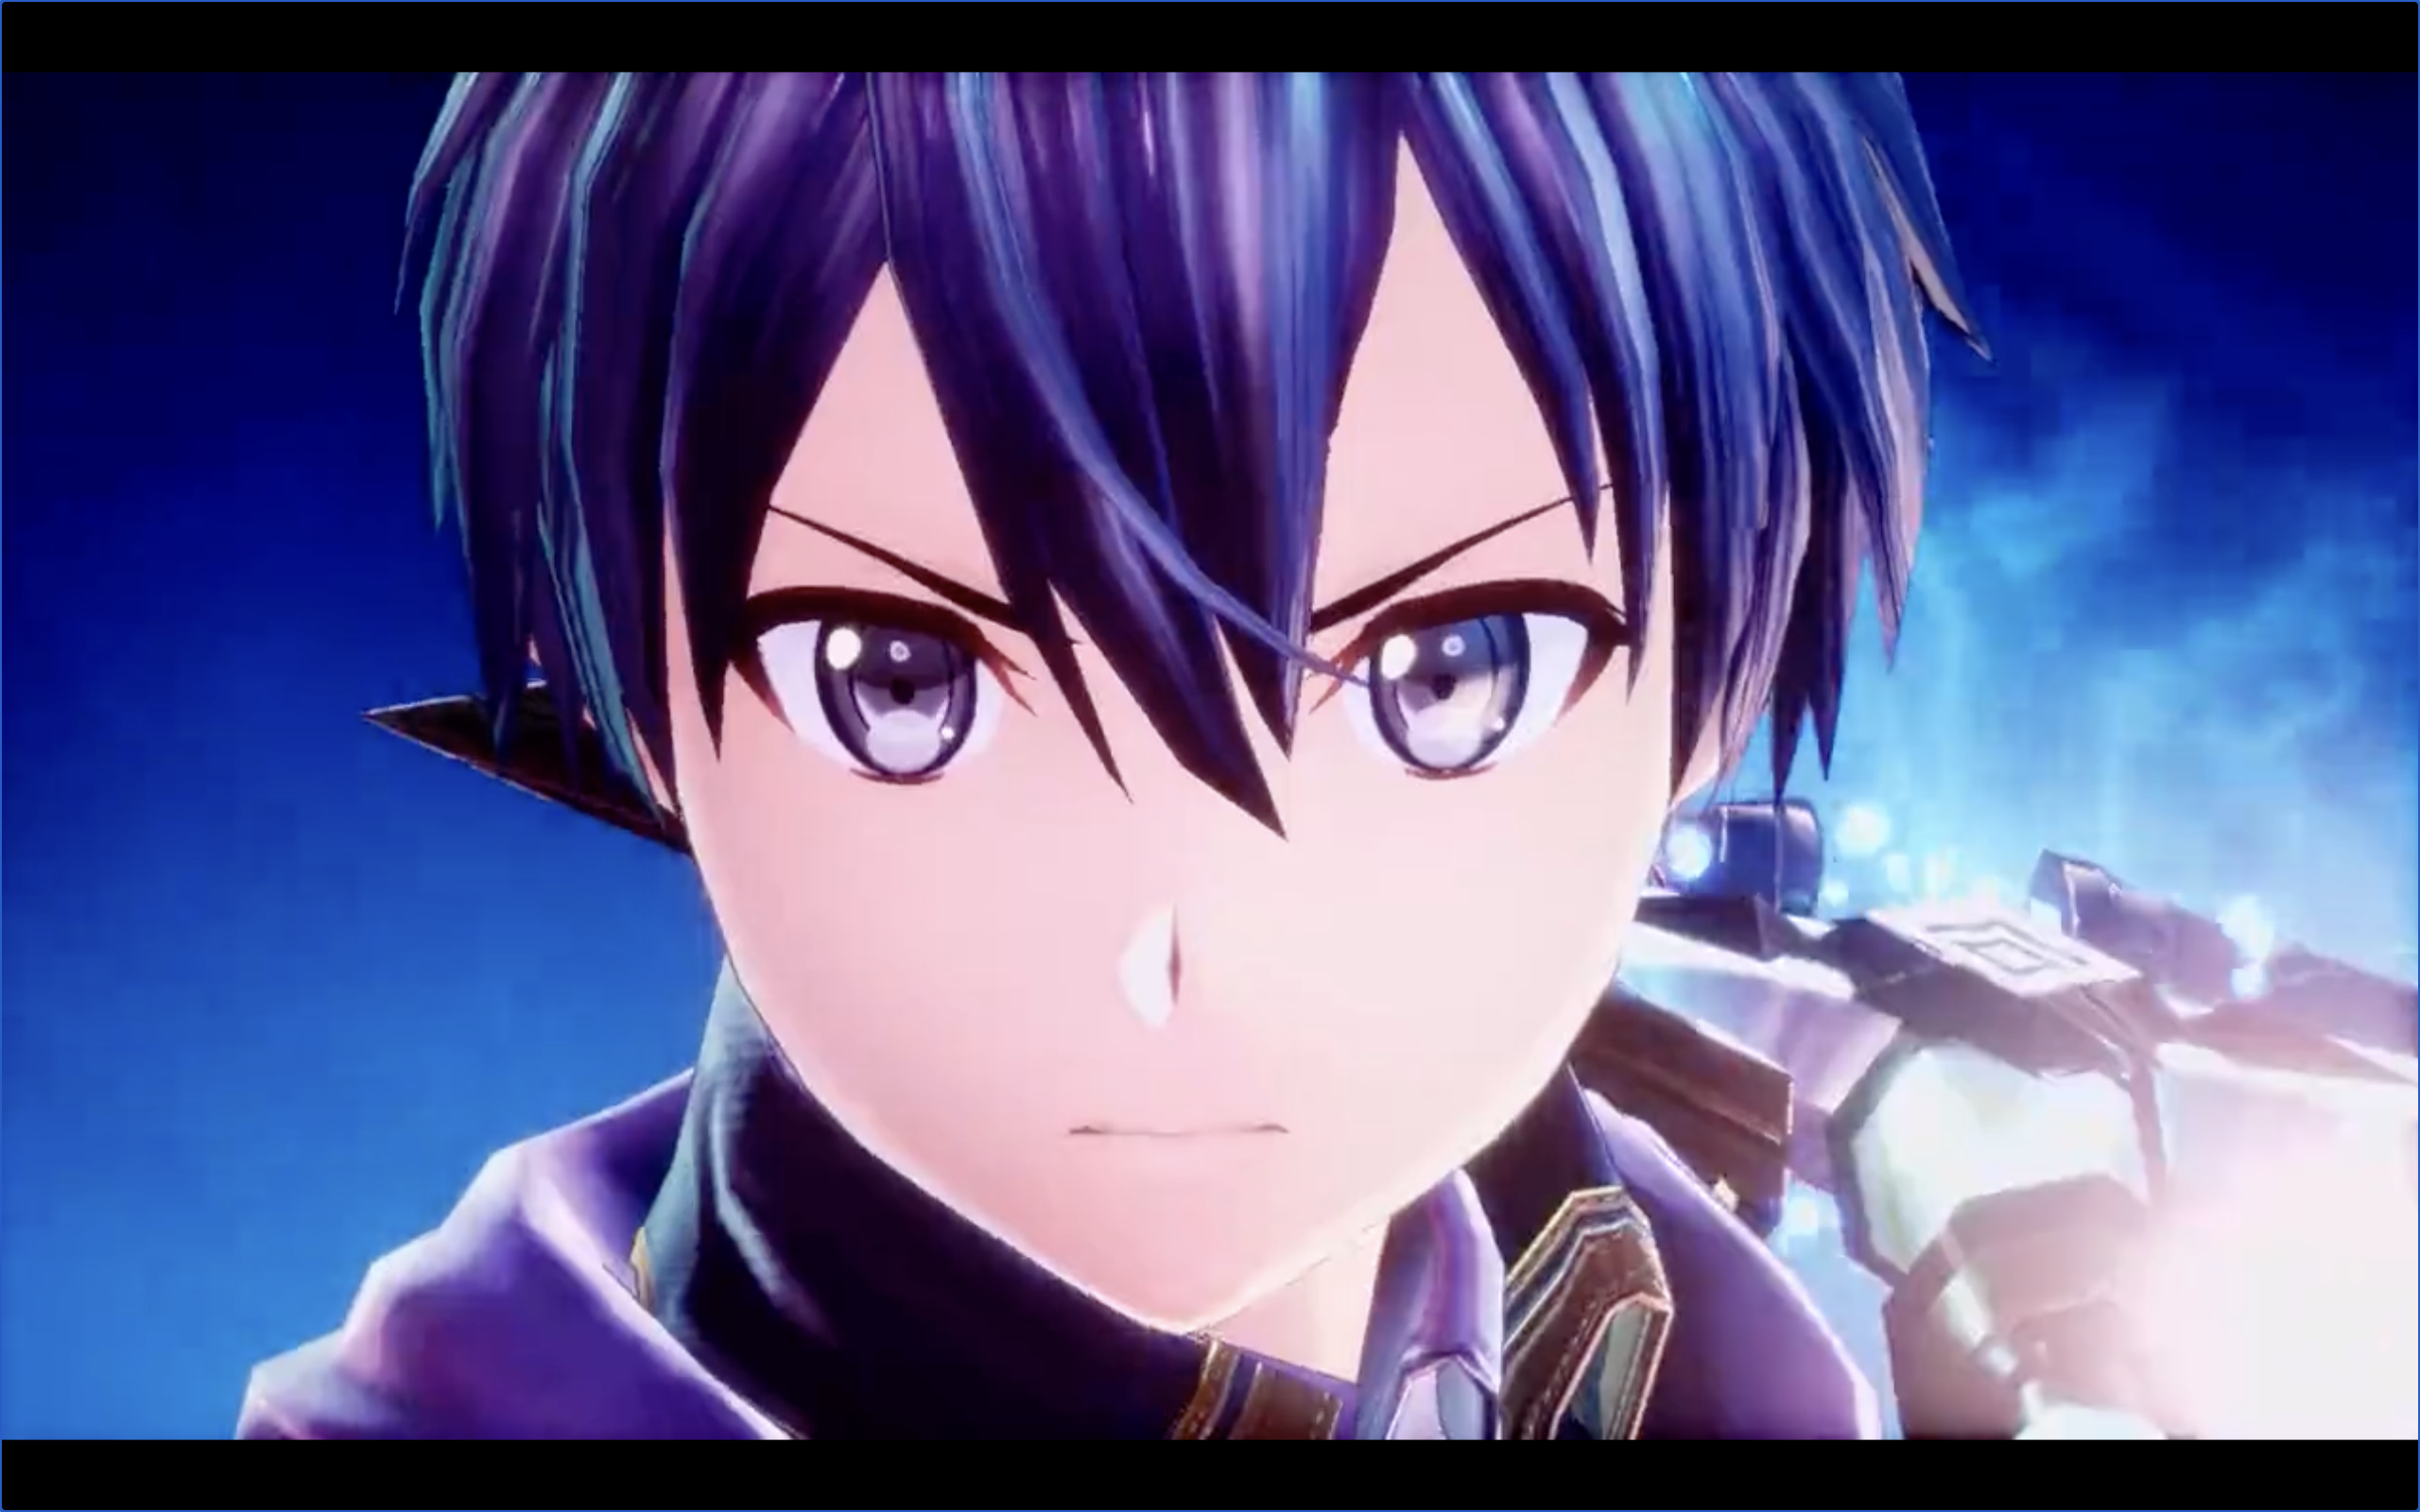 See the Sword Art Online: Last Recollection New Scythe Weapon in Action